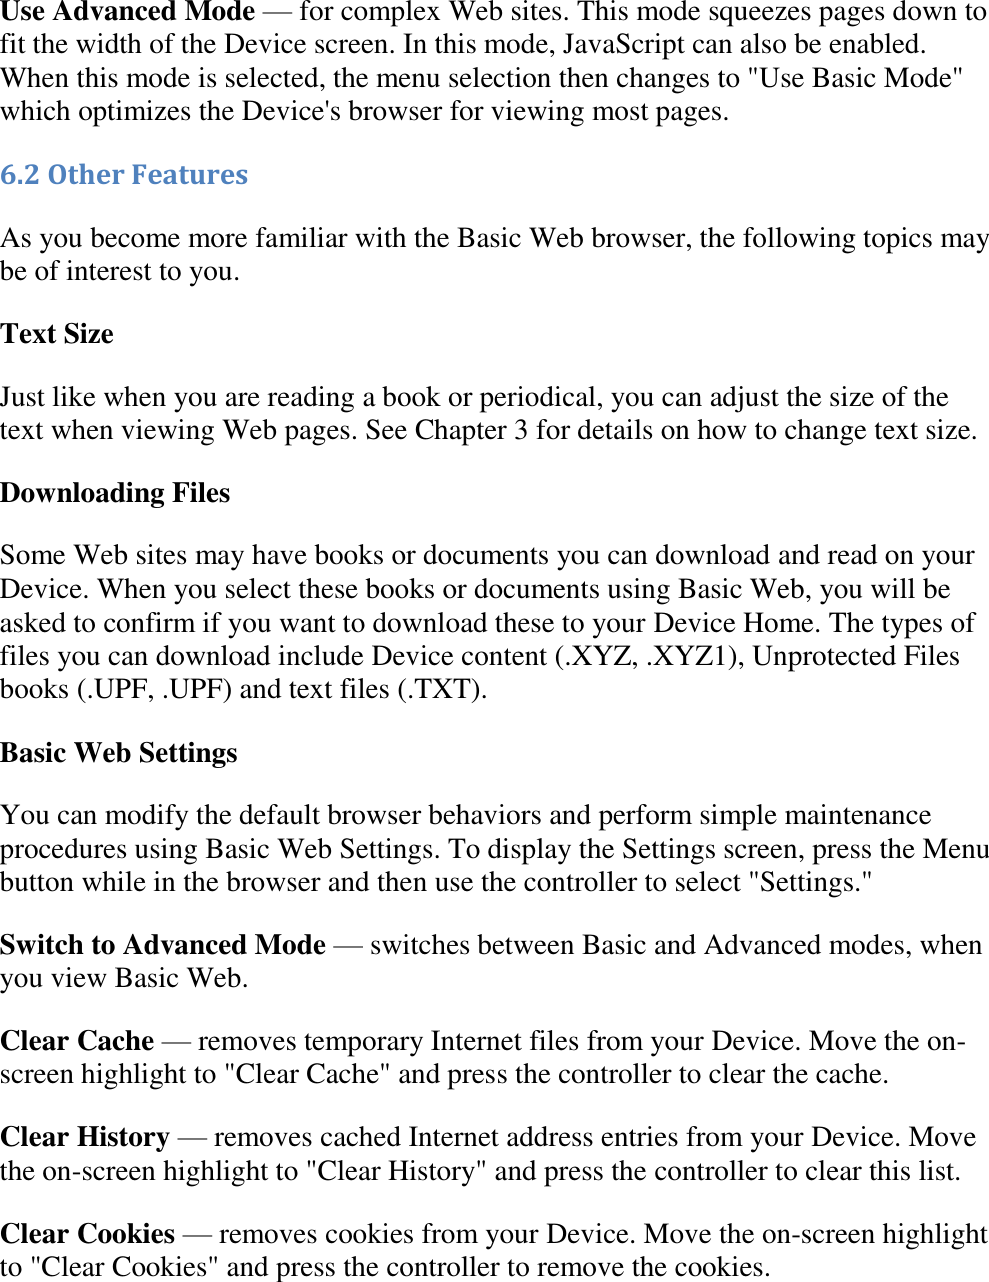   Use Advanced Mode — for complex Web sites. This mode squeezes pages down to fit the width of the Device screen. In this mode, JavaScript can also be enabled. When this mode is selected, the menu selection then changes to &quot;Use Basic Mode&quot; which optimizes the Device&apos;s browser for viewing most pages. 6.2 Other Features As you become more familiar with the Basic Web browser, the following topics may be of interest to you. Text Size Just like when you are reading a book or periodical, you can adjust the size of the text when viewing Web pages. See Chapter 3 for details on how to change text size. Downloading Files Some Web sites may have books or documents you can download and read on your Device. When you select these books or documents using Basic Web, you will be asked to confirm if you want to download these to your Device Home. The types of files you can download include Device content (.XYZ, .XYZ1), Unprotected Files books (.UPF, .UPF) and text files (.TXT). Basic Web Settings You can modify the default browser behaviors and perform simple maintenance procedures using Basic Web Settings. To display the Settings screen, press the Menu button while in the browser and then use the controller to select &quot;Settings.&quot; Switch to Advanced Mode — switches between Basic and Advanced modes, when you view Basic Web. Clear Cache — removes temporary Internet files from your Device. Move the on-screen highlight to &quot;Clear Cache&quot; and press the controller to clear the cache. Clear History — removes cached Internet address entries from your Device. Move the on-screen highlight to &quot;Clear History&quot; and press the controller to clear this list. Clear Cookies — removes cookies from your Device. Move the on-screen highlight to &quot;Clear Cookies&quot; and press the controller to remove the cookies. 